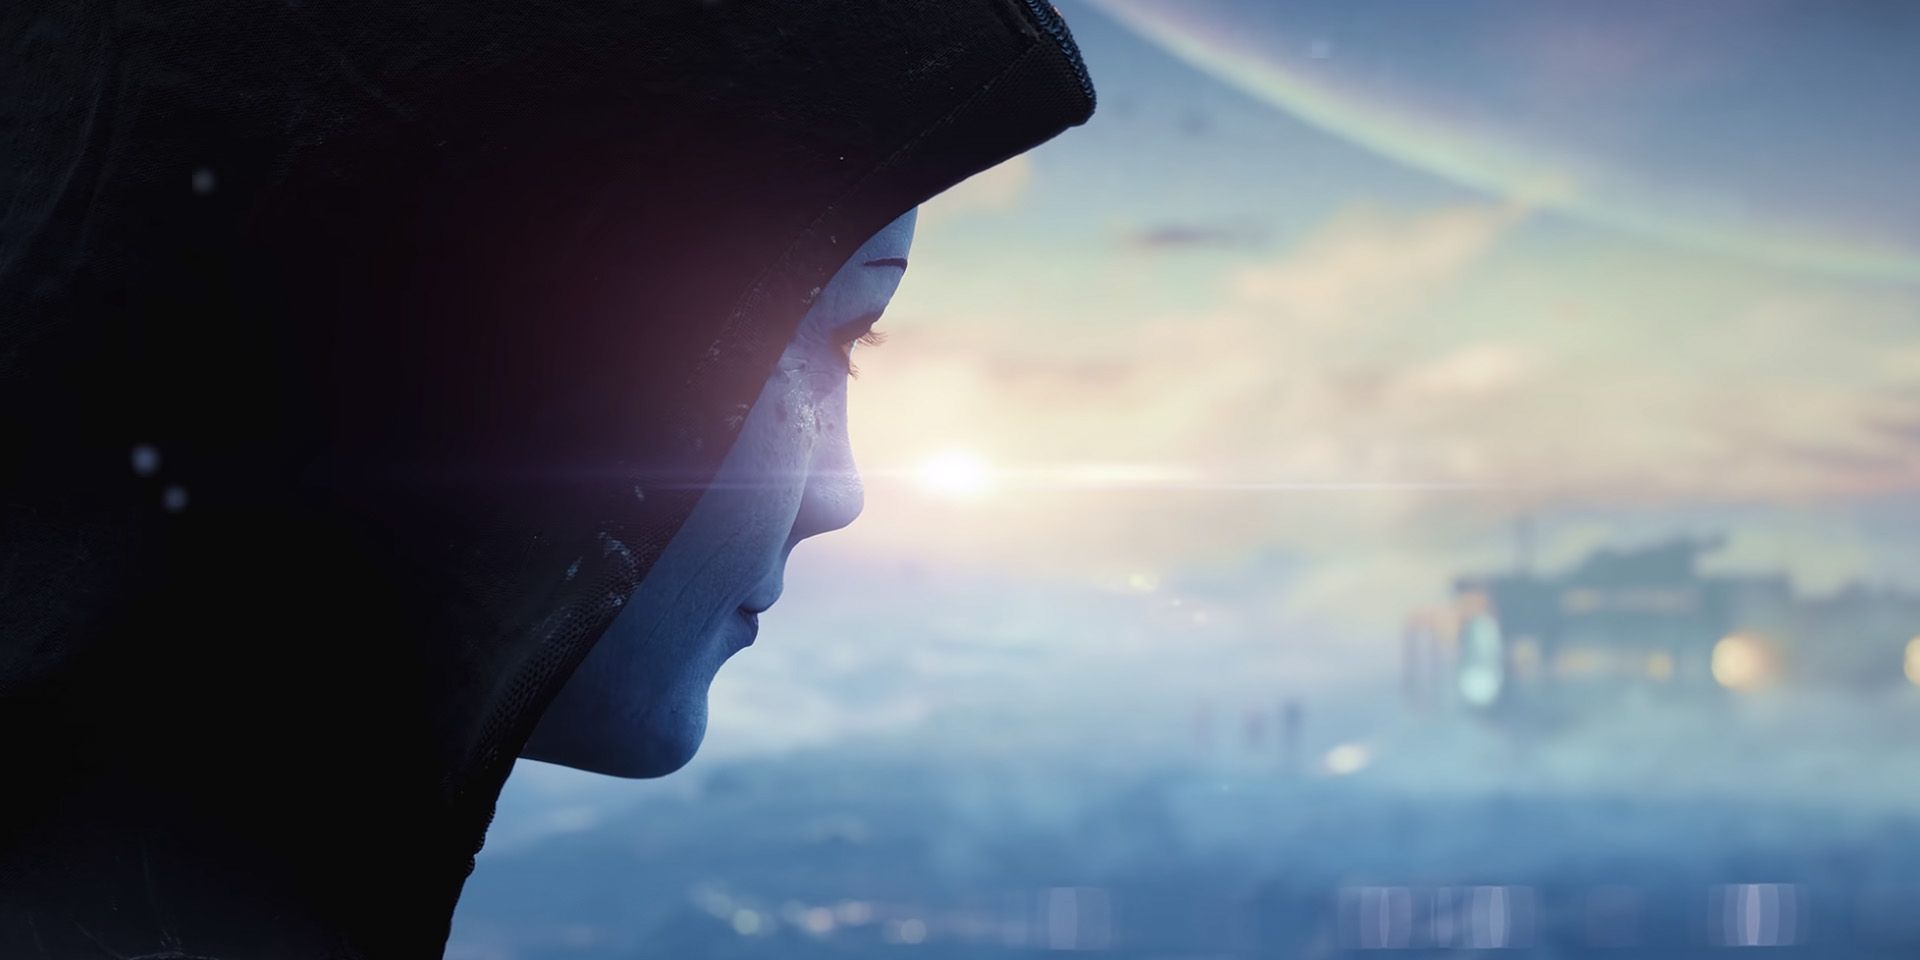 Liara's reveal in the 2020 Mass Effect Trailer